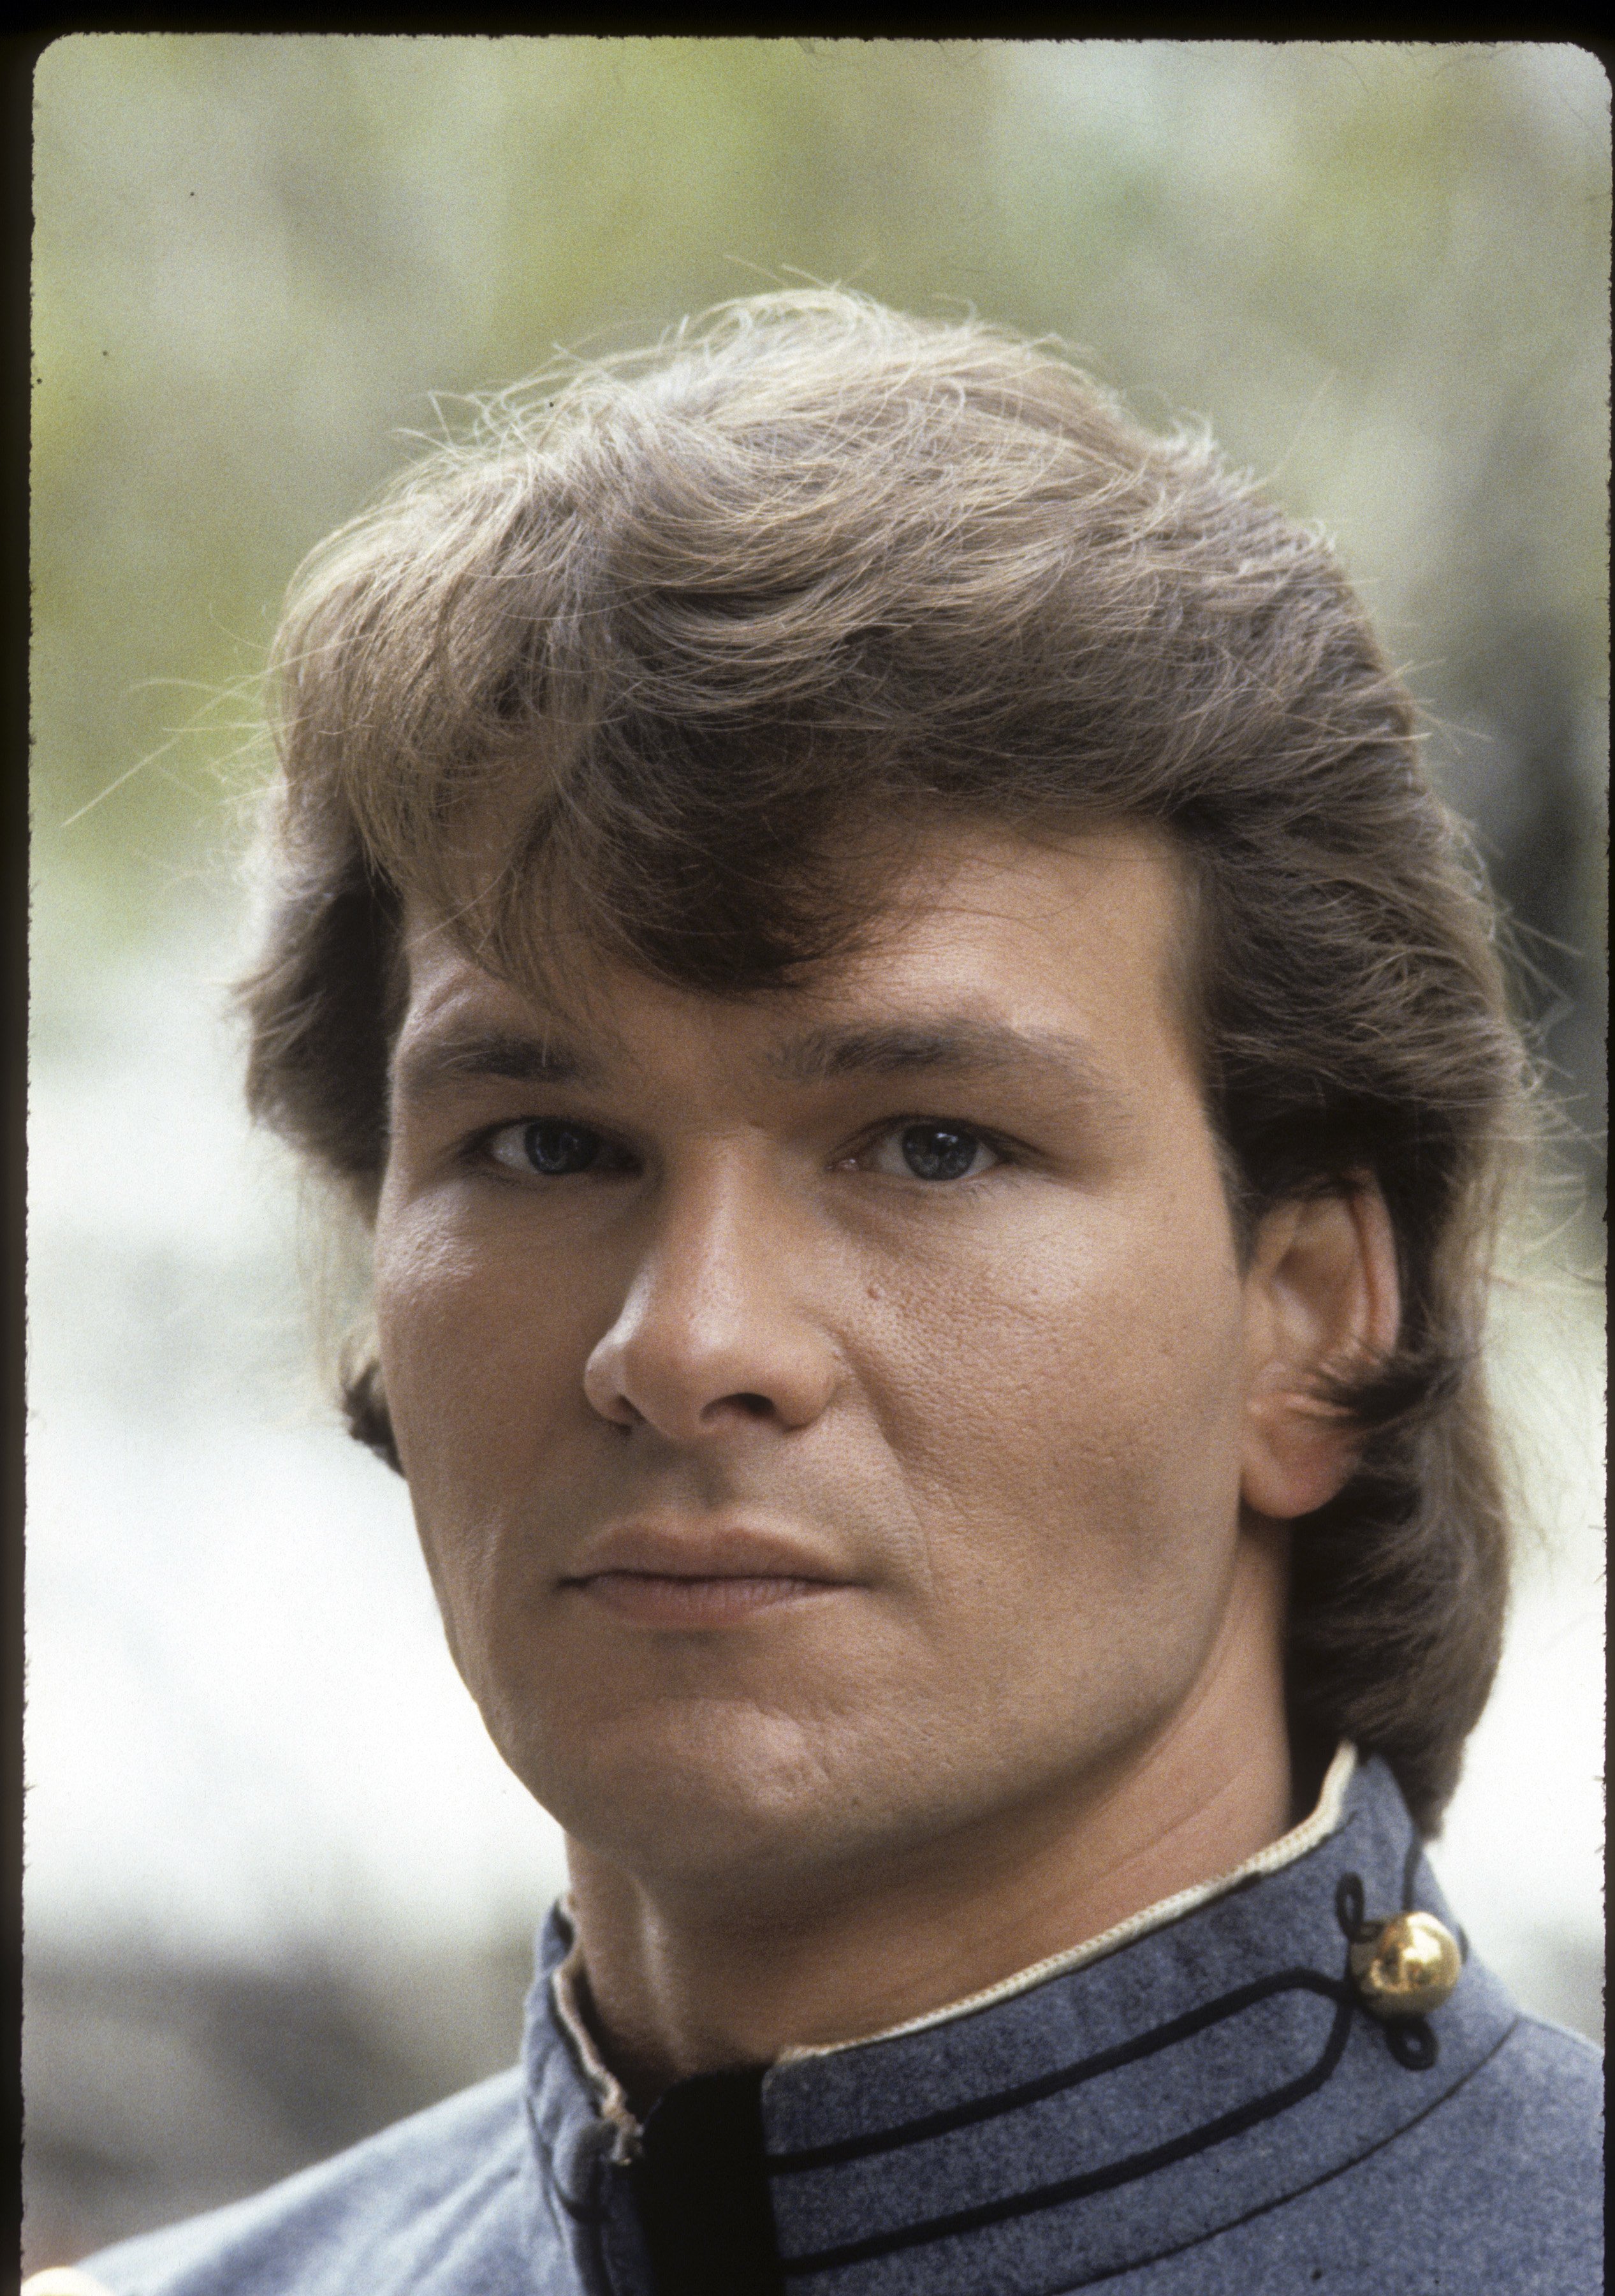 Patrick Swayze on the set of "North and South" on November 3, 1985 | Source: Getty Images